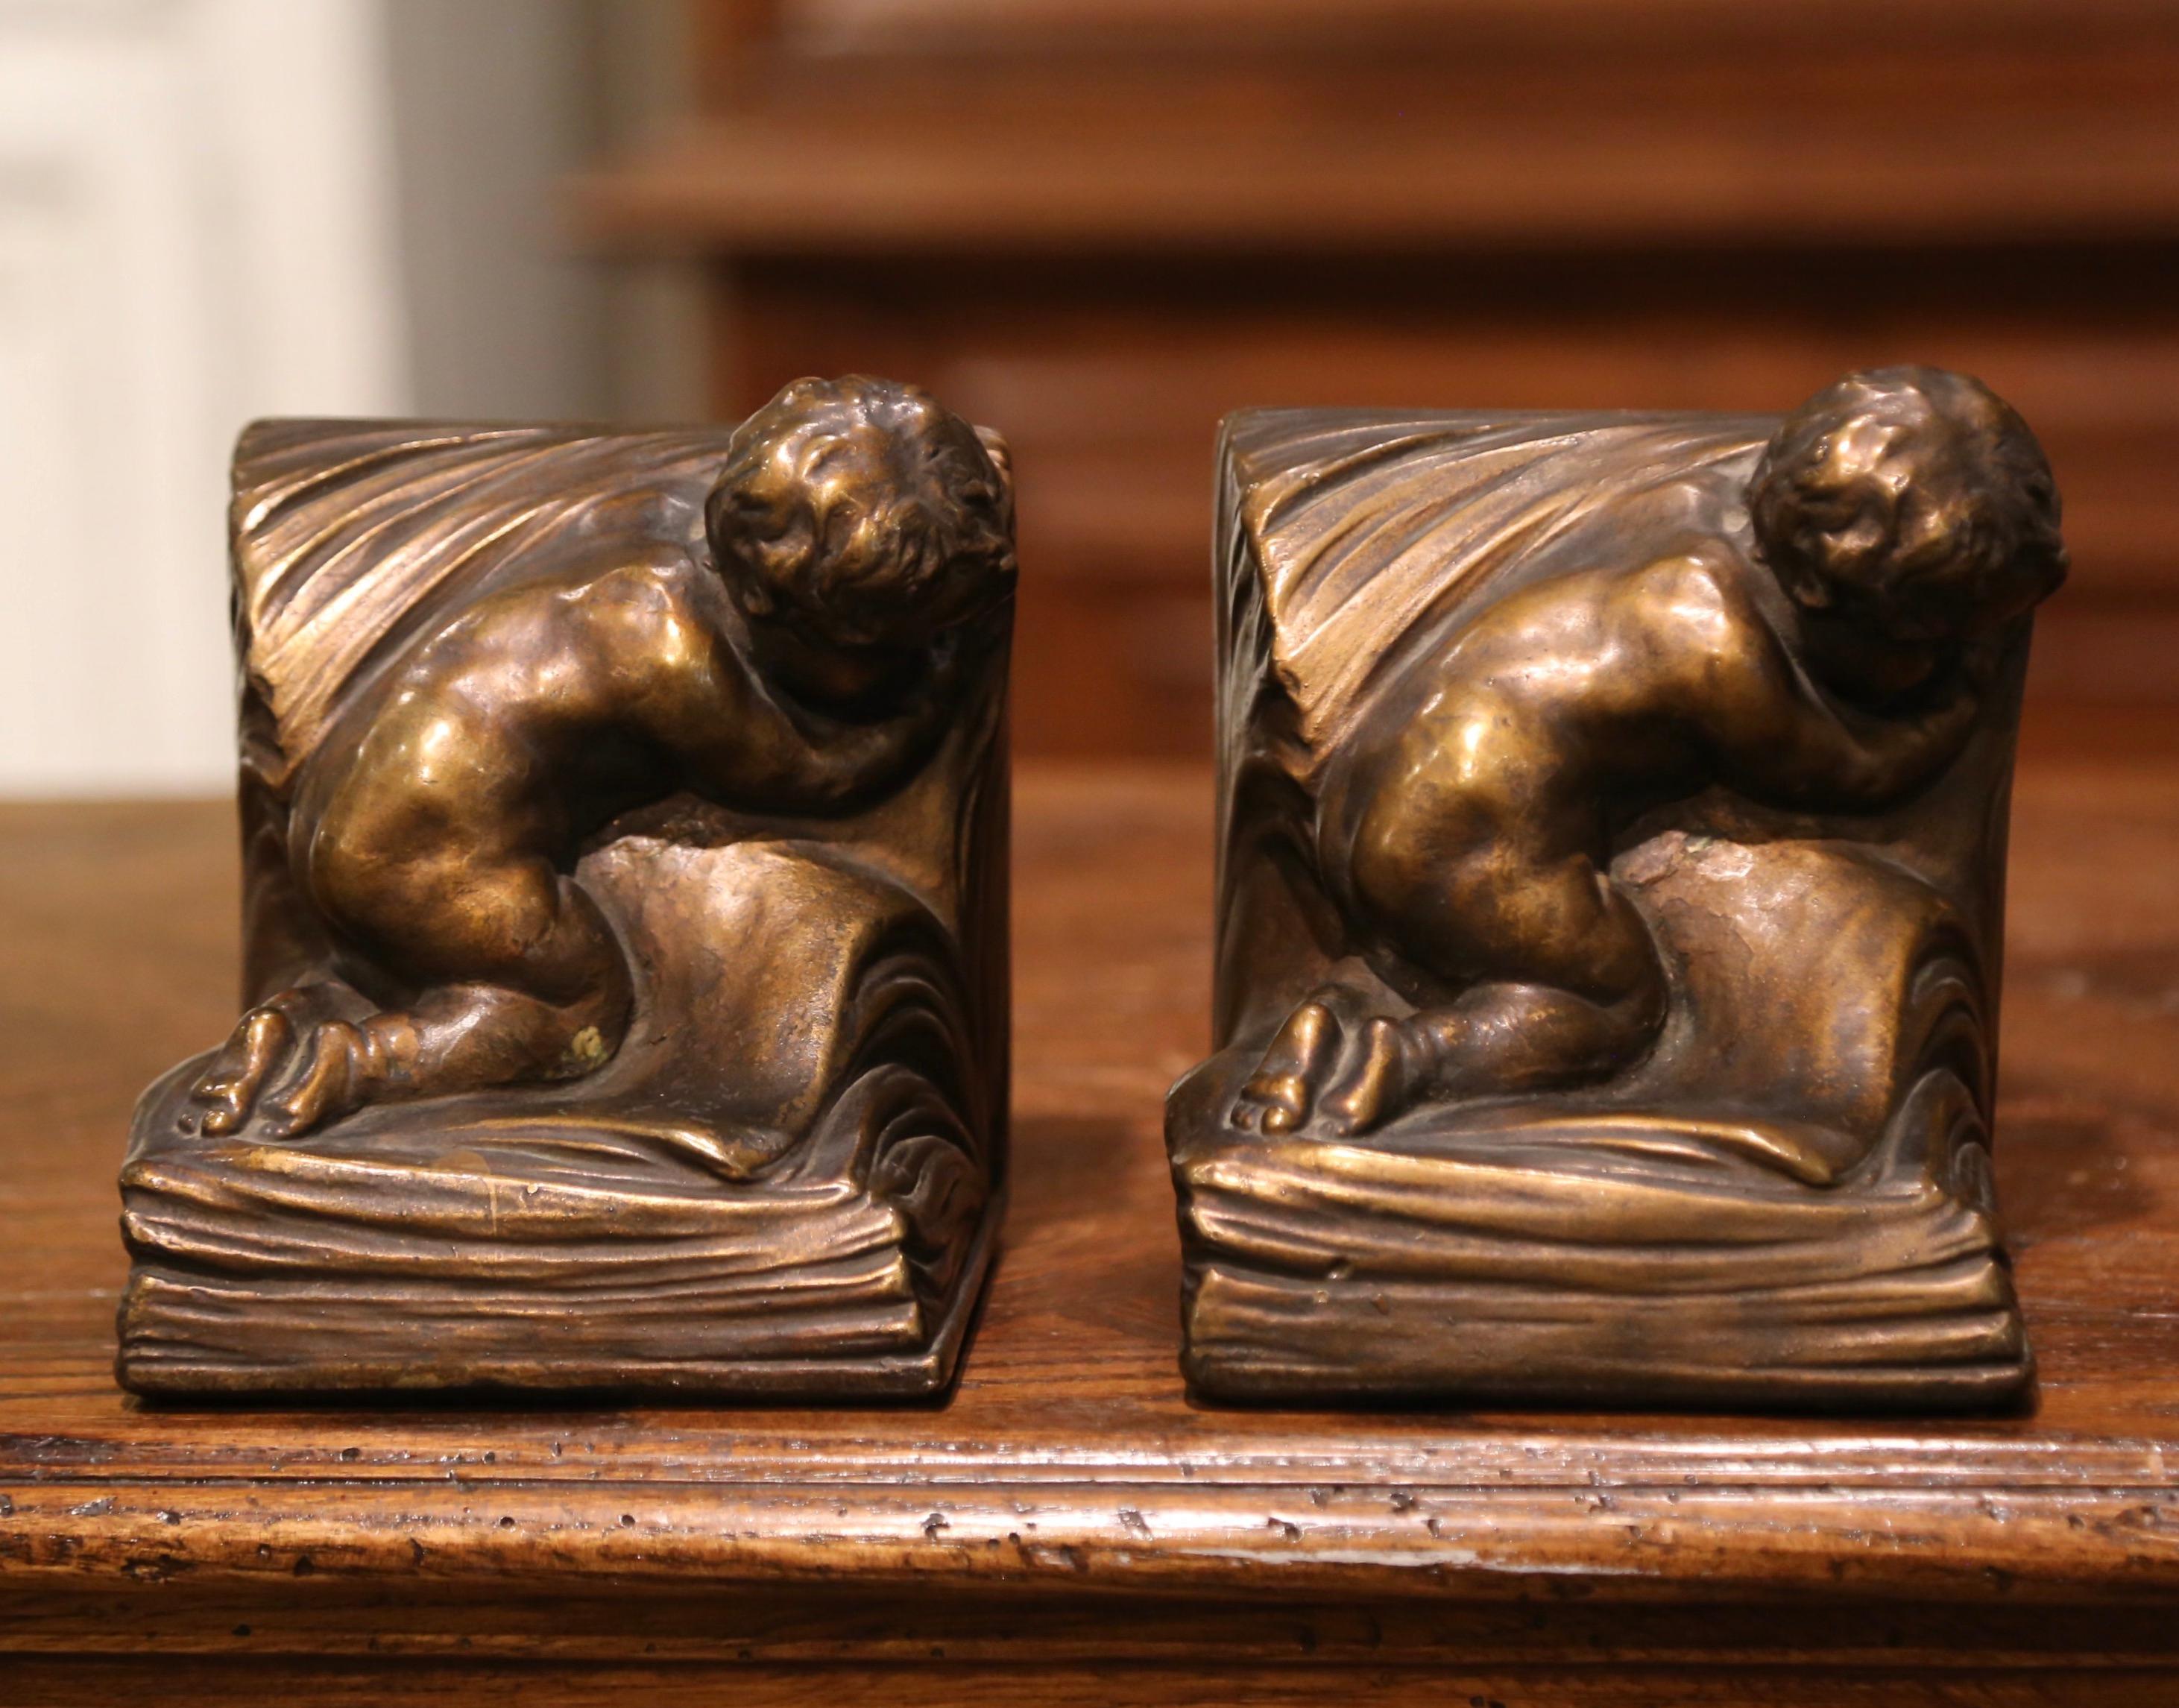 Hand-Crafted Pair of Patinated Armor Bronze Cherub Bookends Signed and Dated CA Johnson 1914